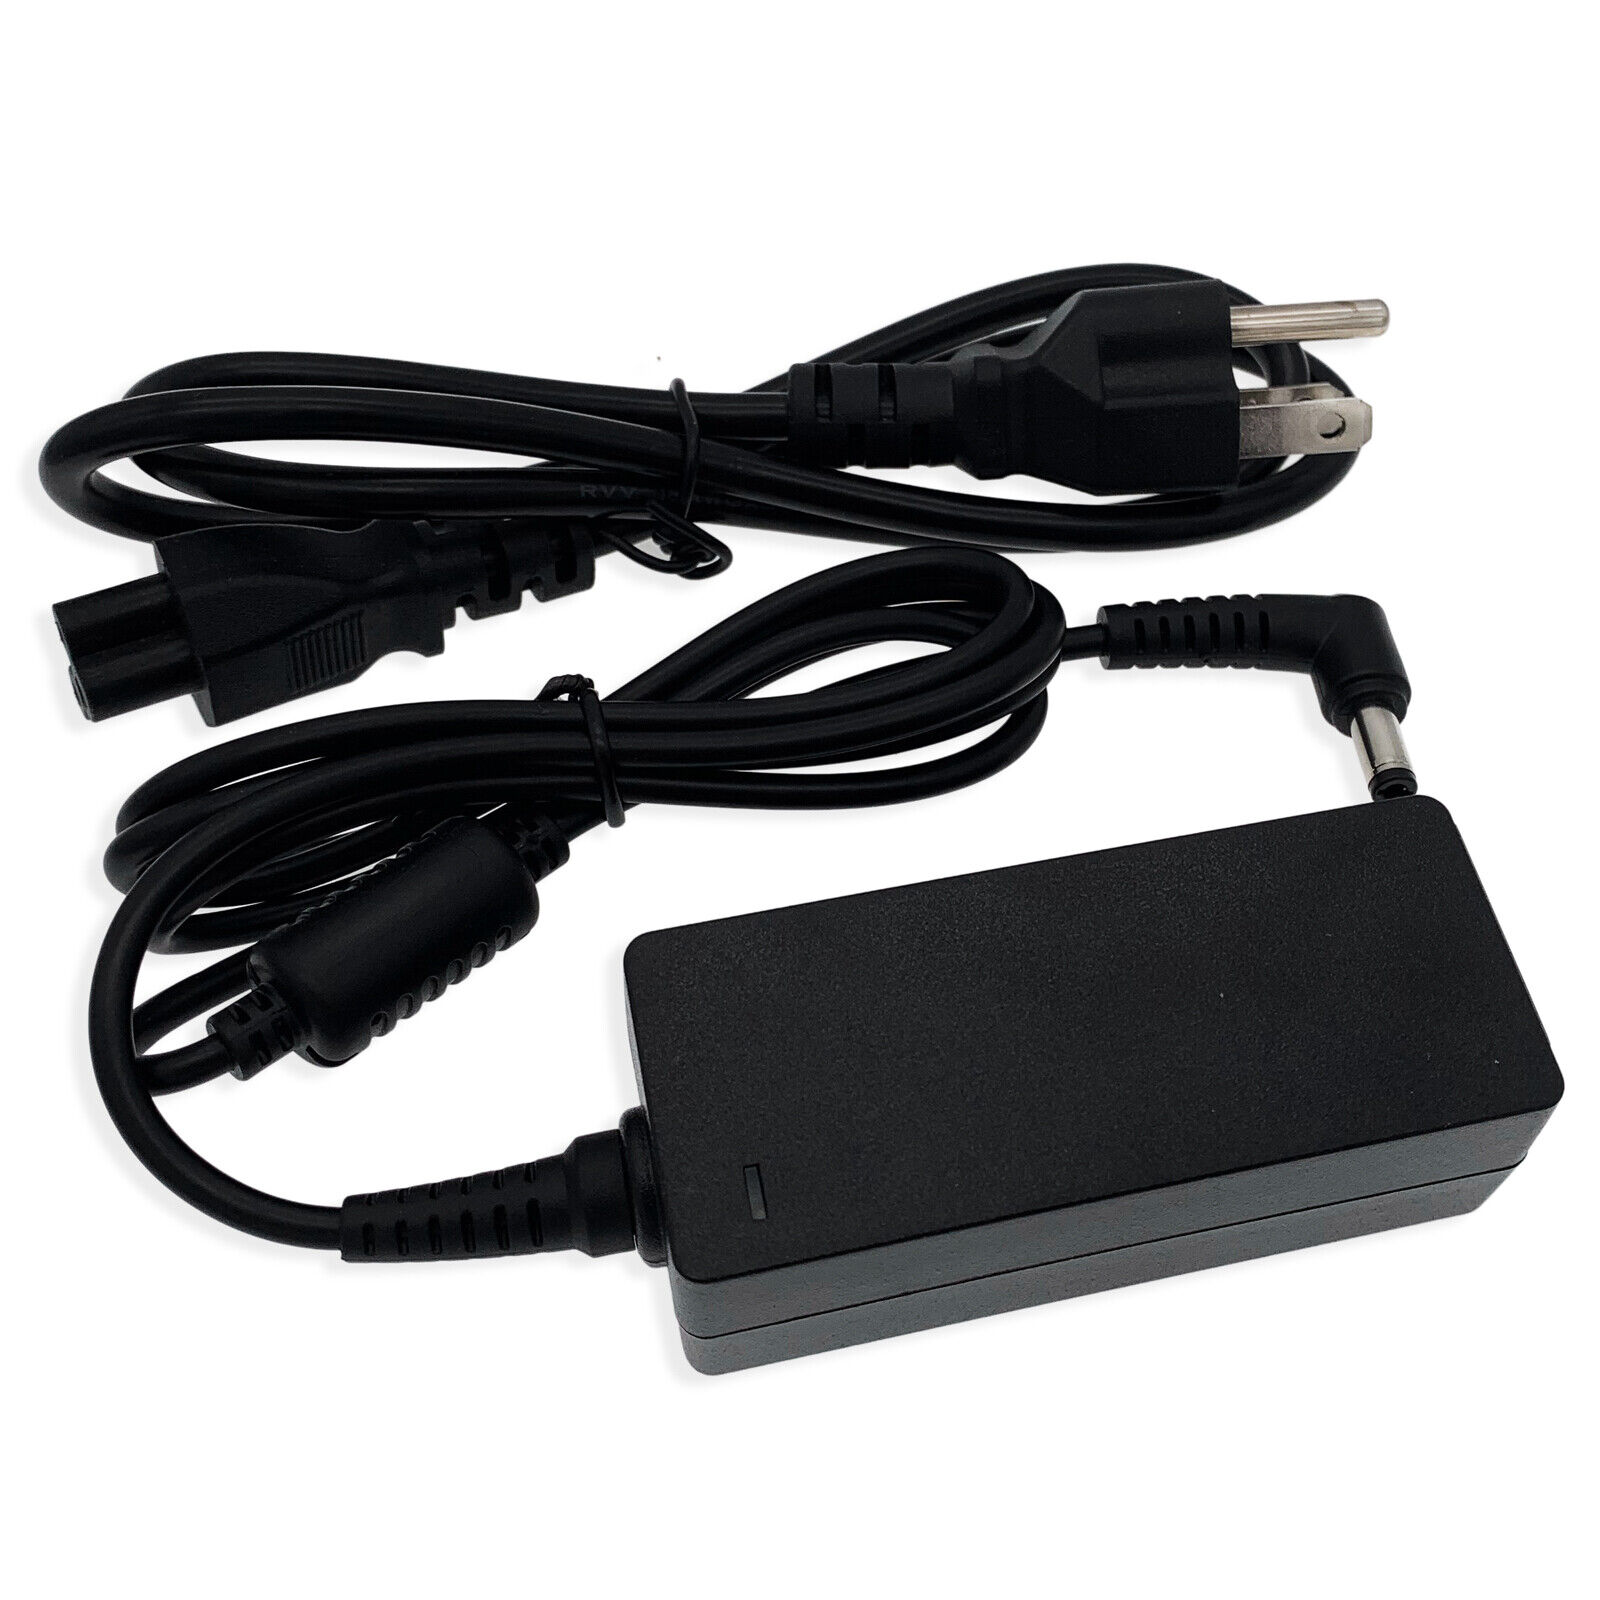 UK 12Vac AC-AC Switching Adapter for 1700mA model JT-12V1700 JUTAI Electronic Output Voltage 12.0V EAN 7625690832842 T